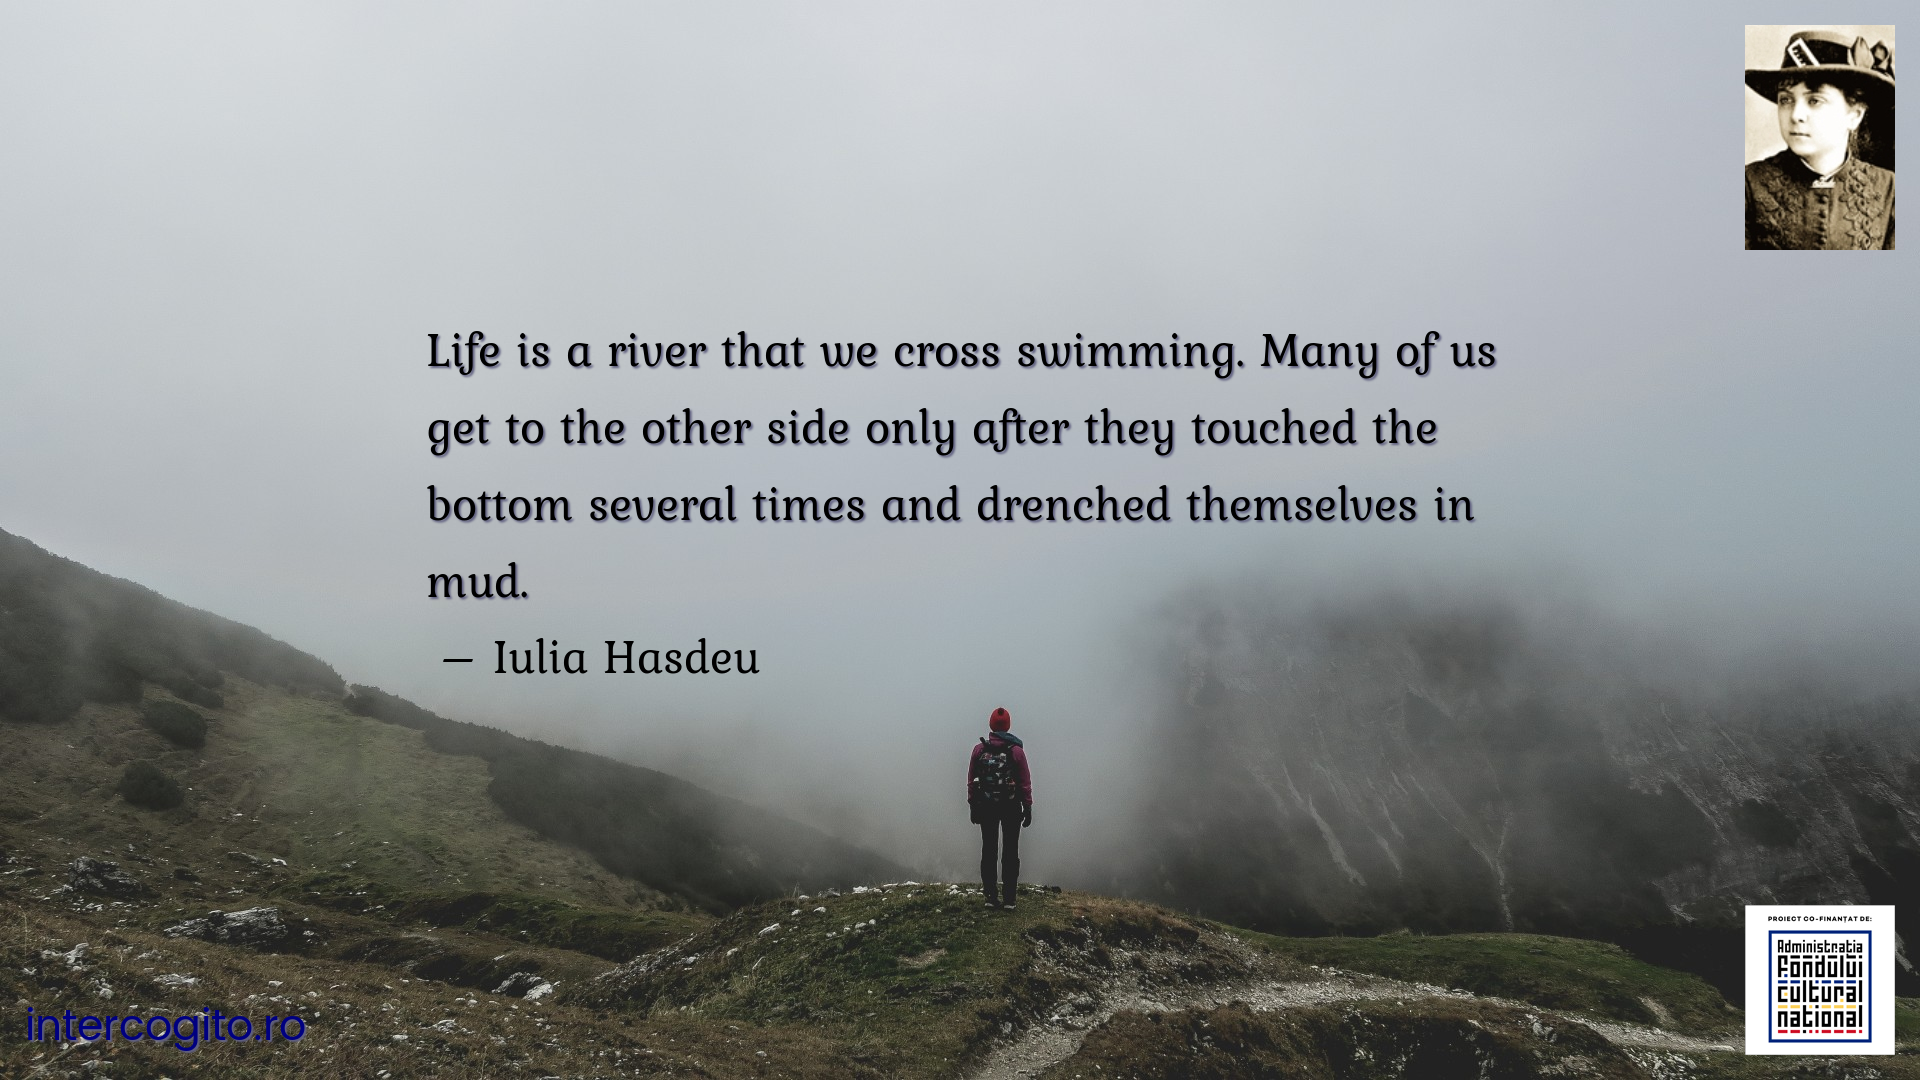 Life is a river that we cross swimming. Many of us get to the other side only after they touched the bottom several times and drenched themselves in mud.